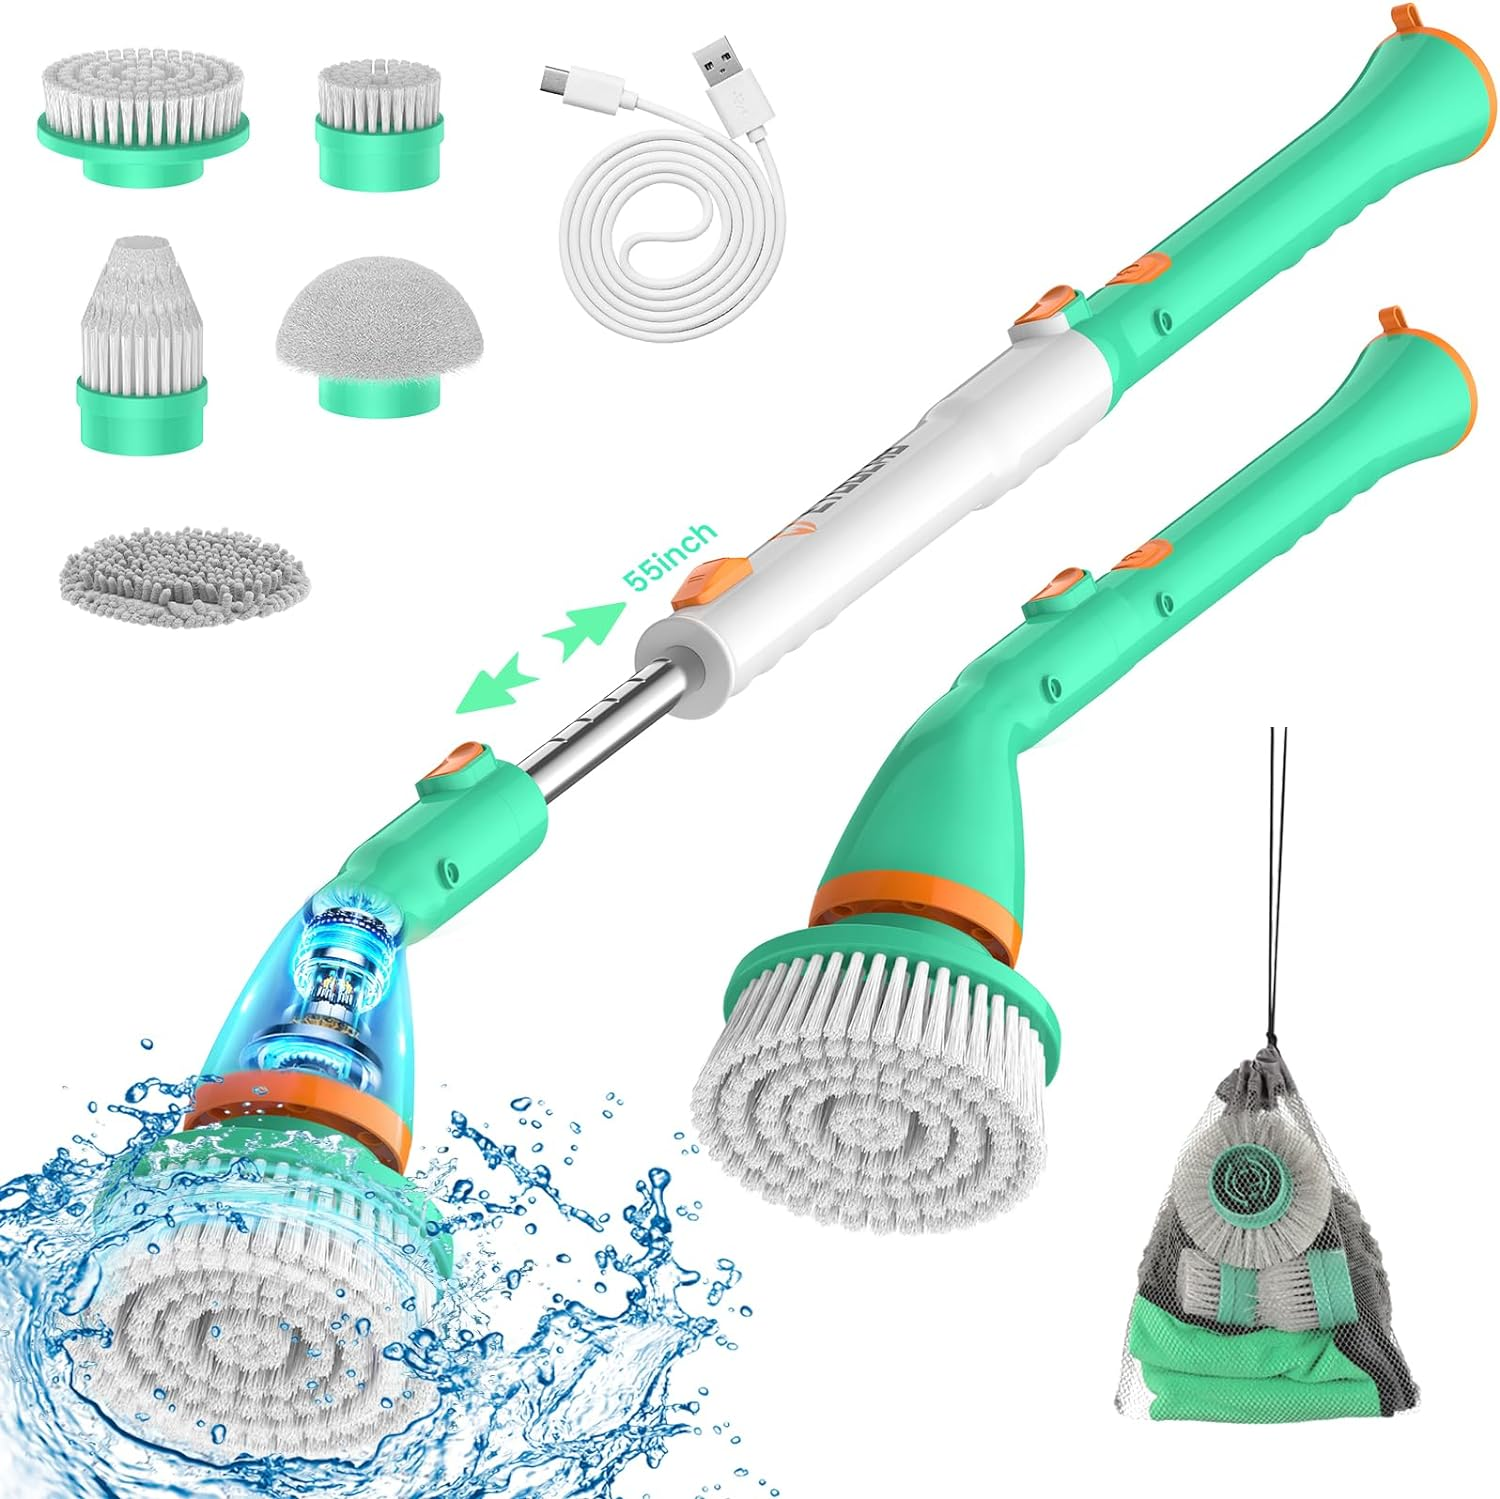 Electric Spin Scrubber, WKY Shower Cleaning Brush, Electric Scrubber Brush  for Cleaning Bathroom, Scrub Brushes for Shower, Shower Bathroom Cleaner